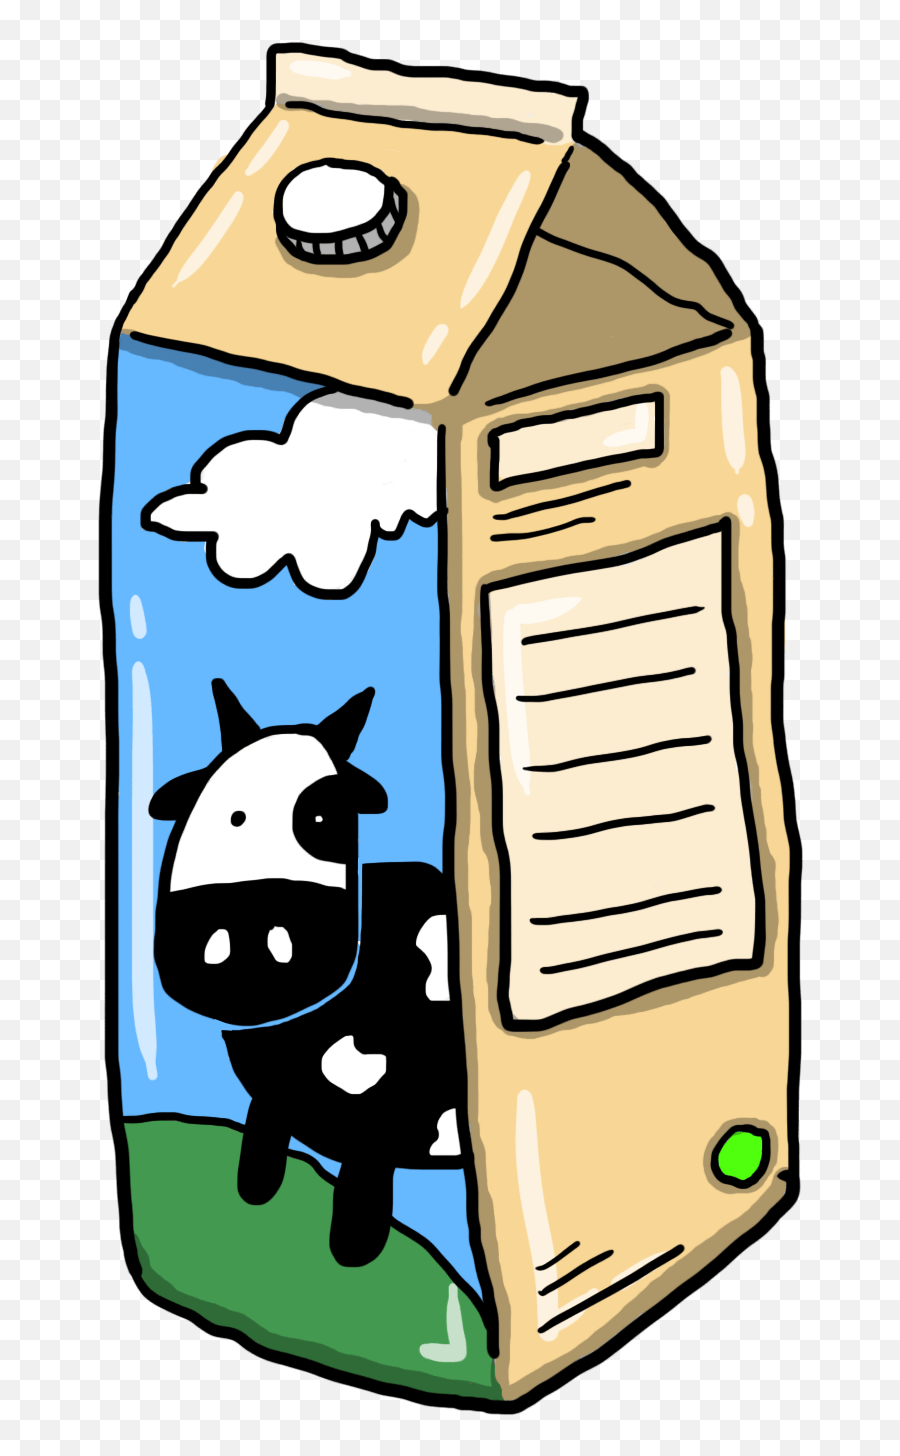 Download Leche Png Image With No - Leche Png Cartoon,Leche Png